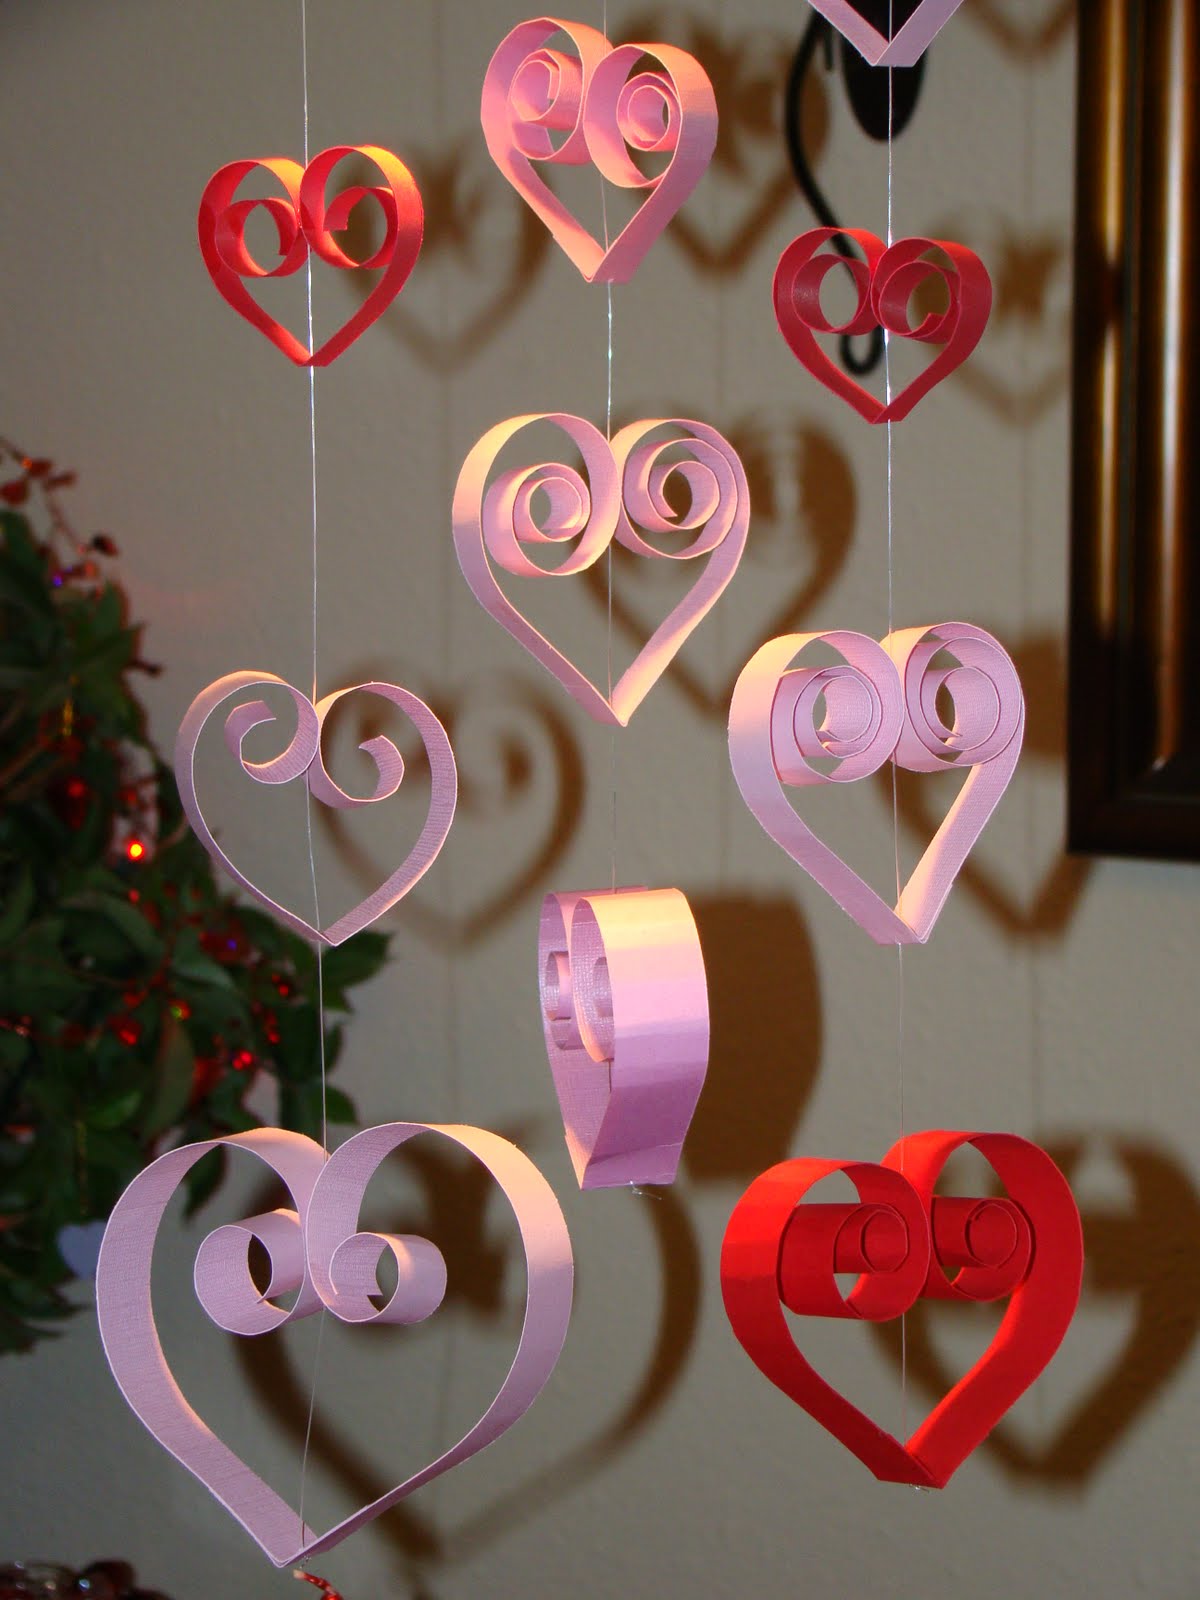 adorable-valentine-day-decorations-to-make-yourself-design-ideas-paper-craft-formed-love-with-pink-and-red